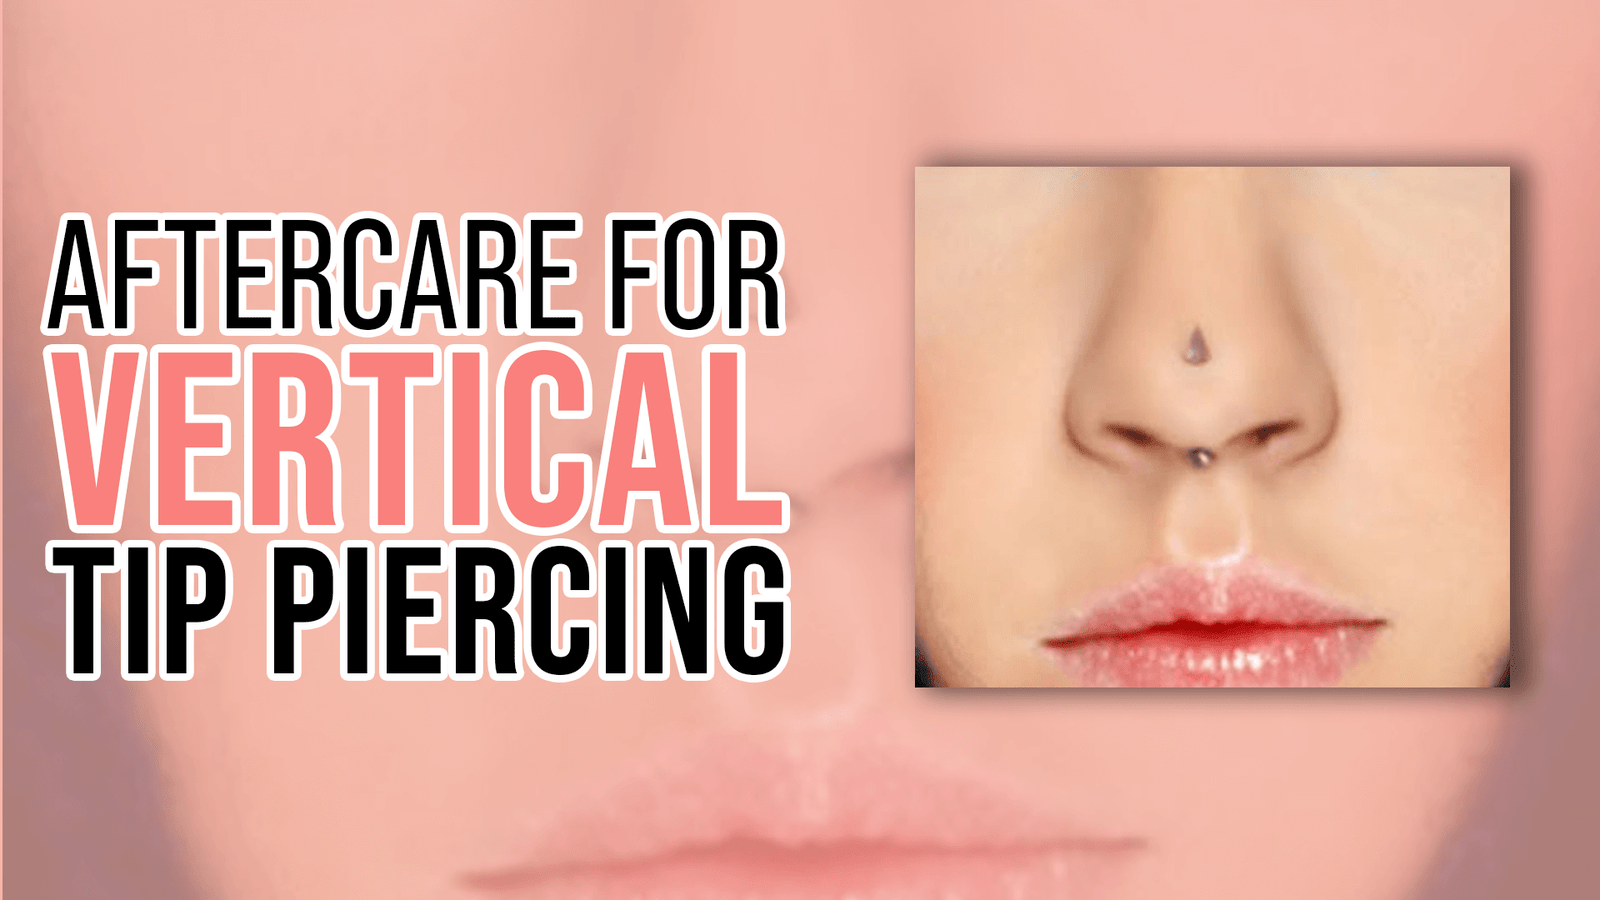 Aftercare-for-Vertical-Tip-Piercing